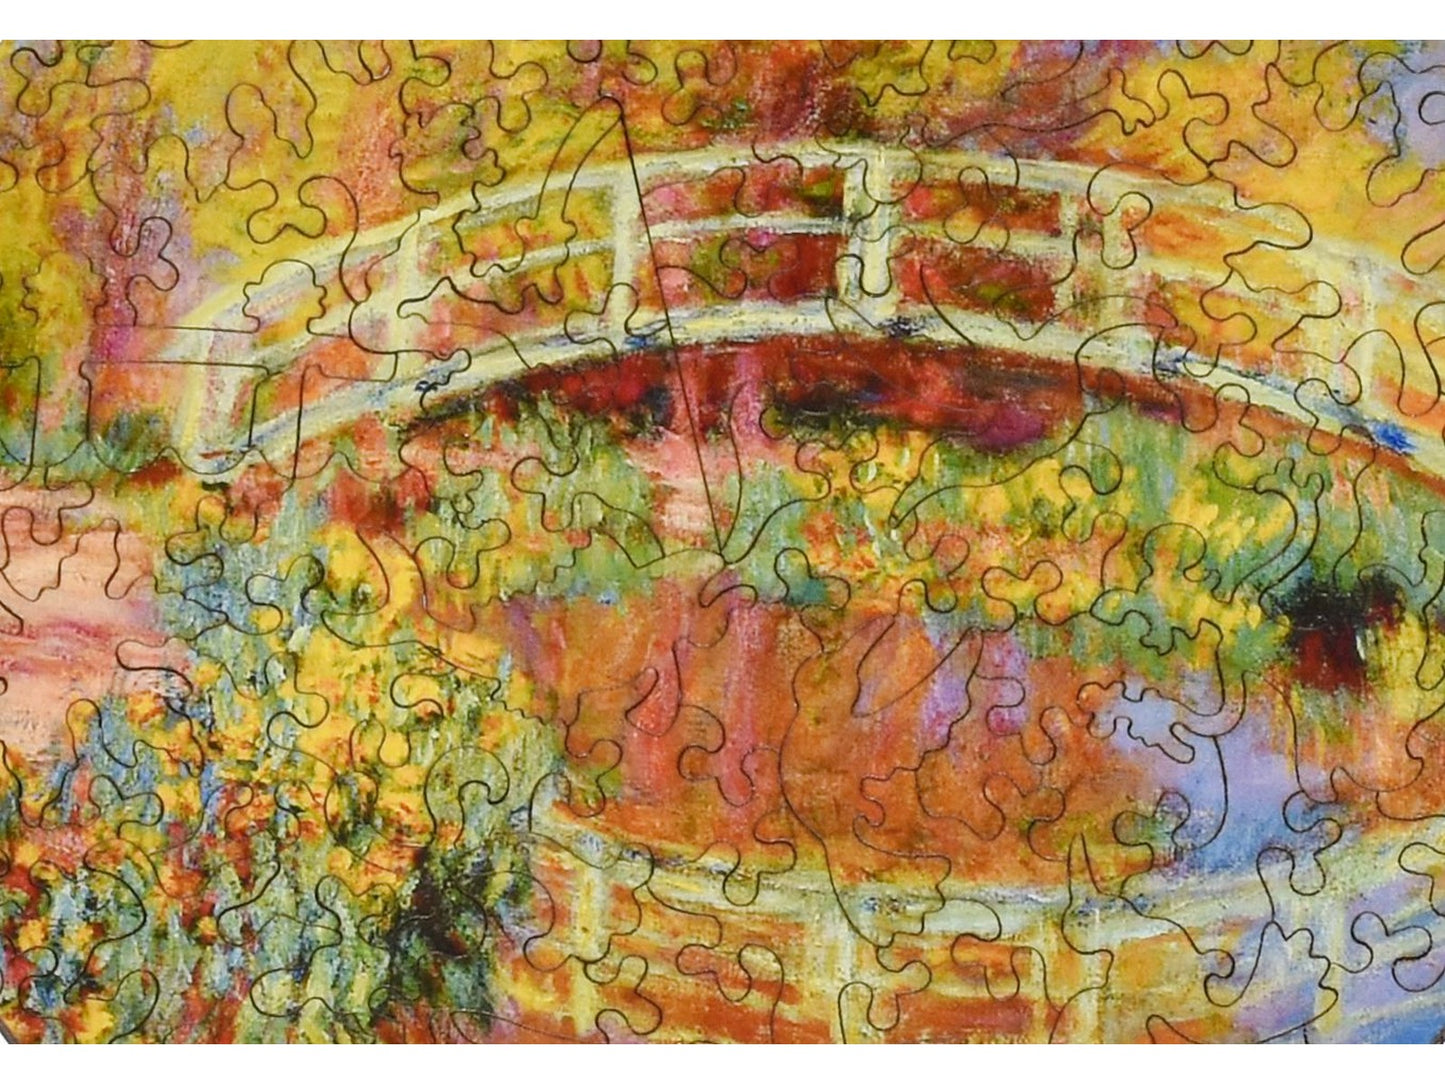 A closeup of the front of the puzzle, Japanese Bridge in Monet's Garden, showing the detail in the pieces.